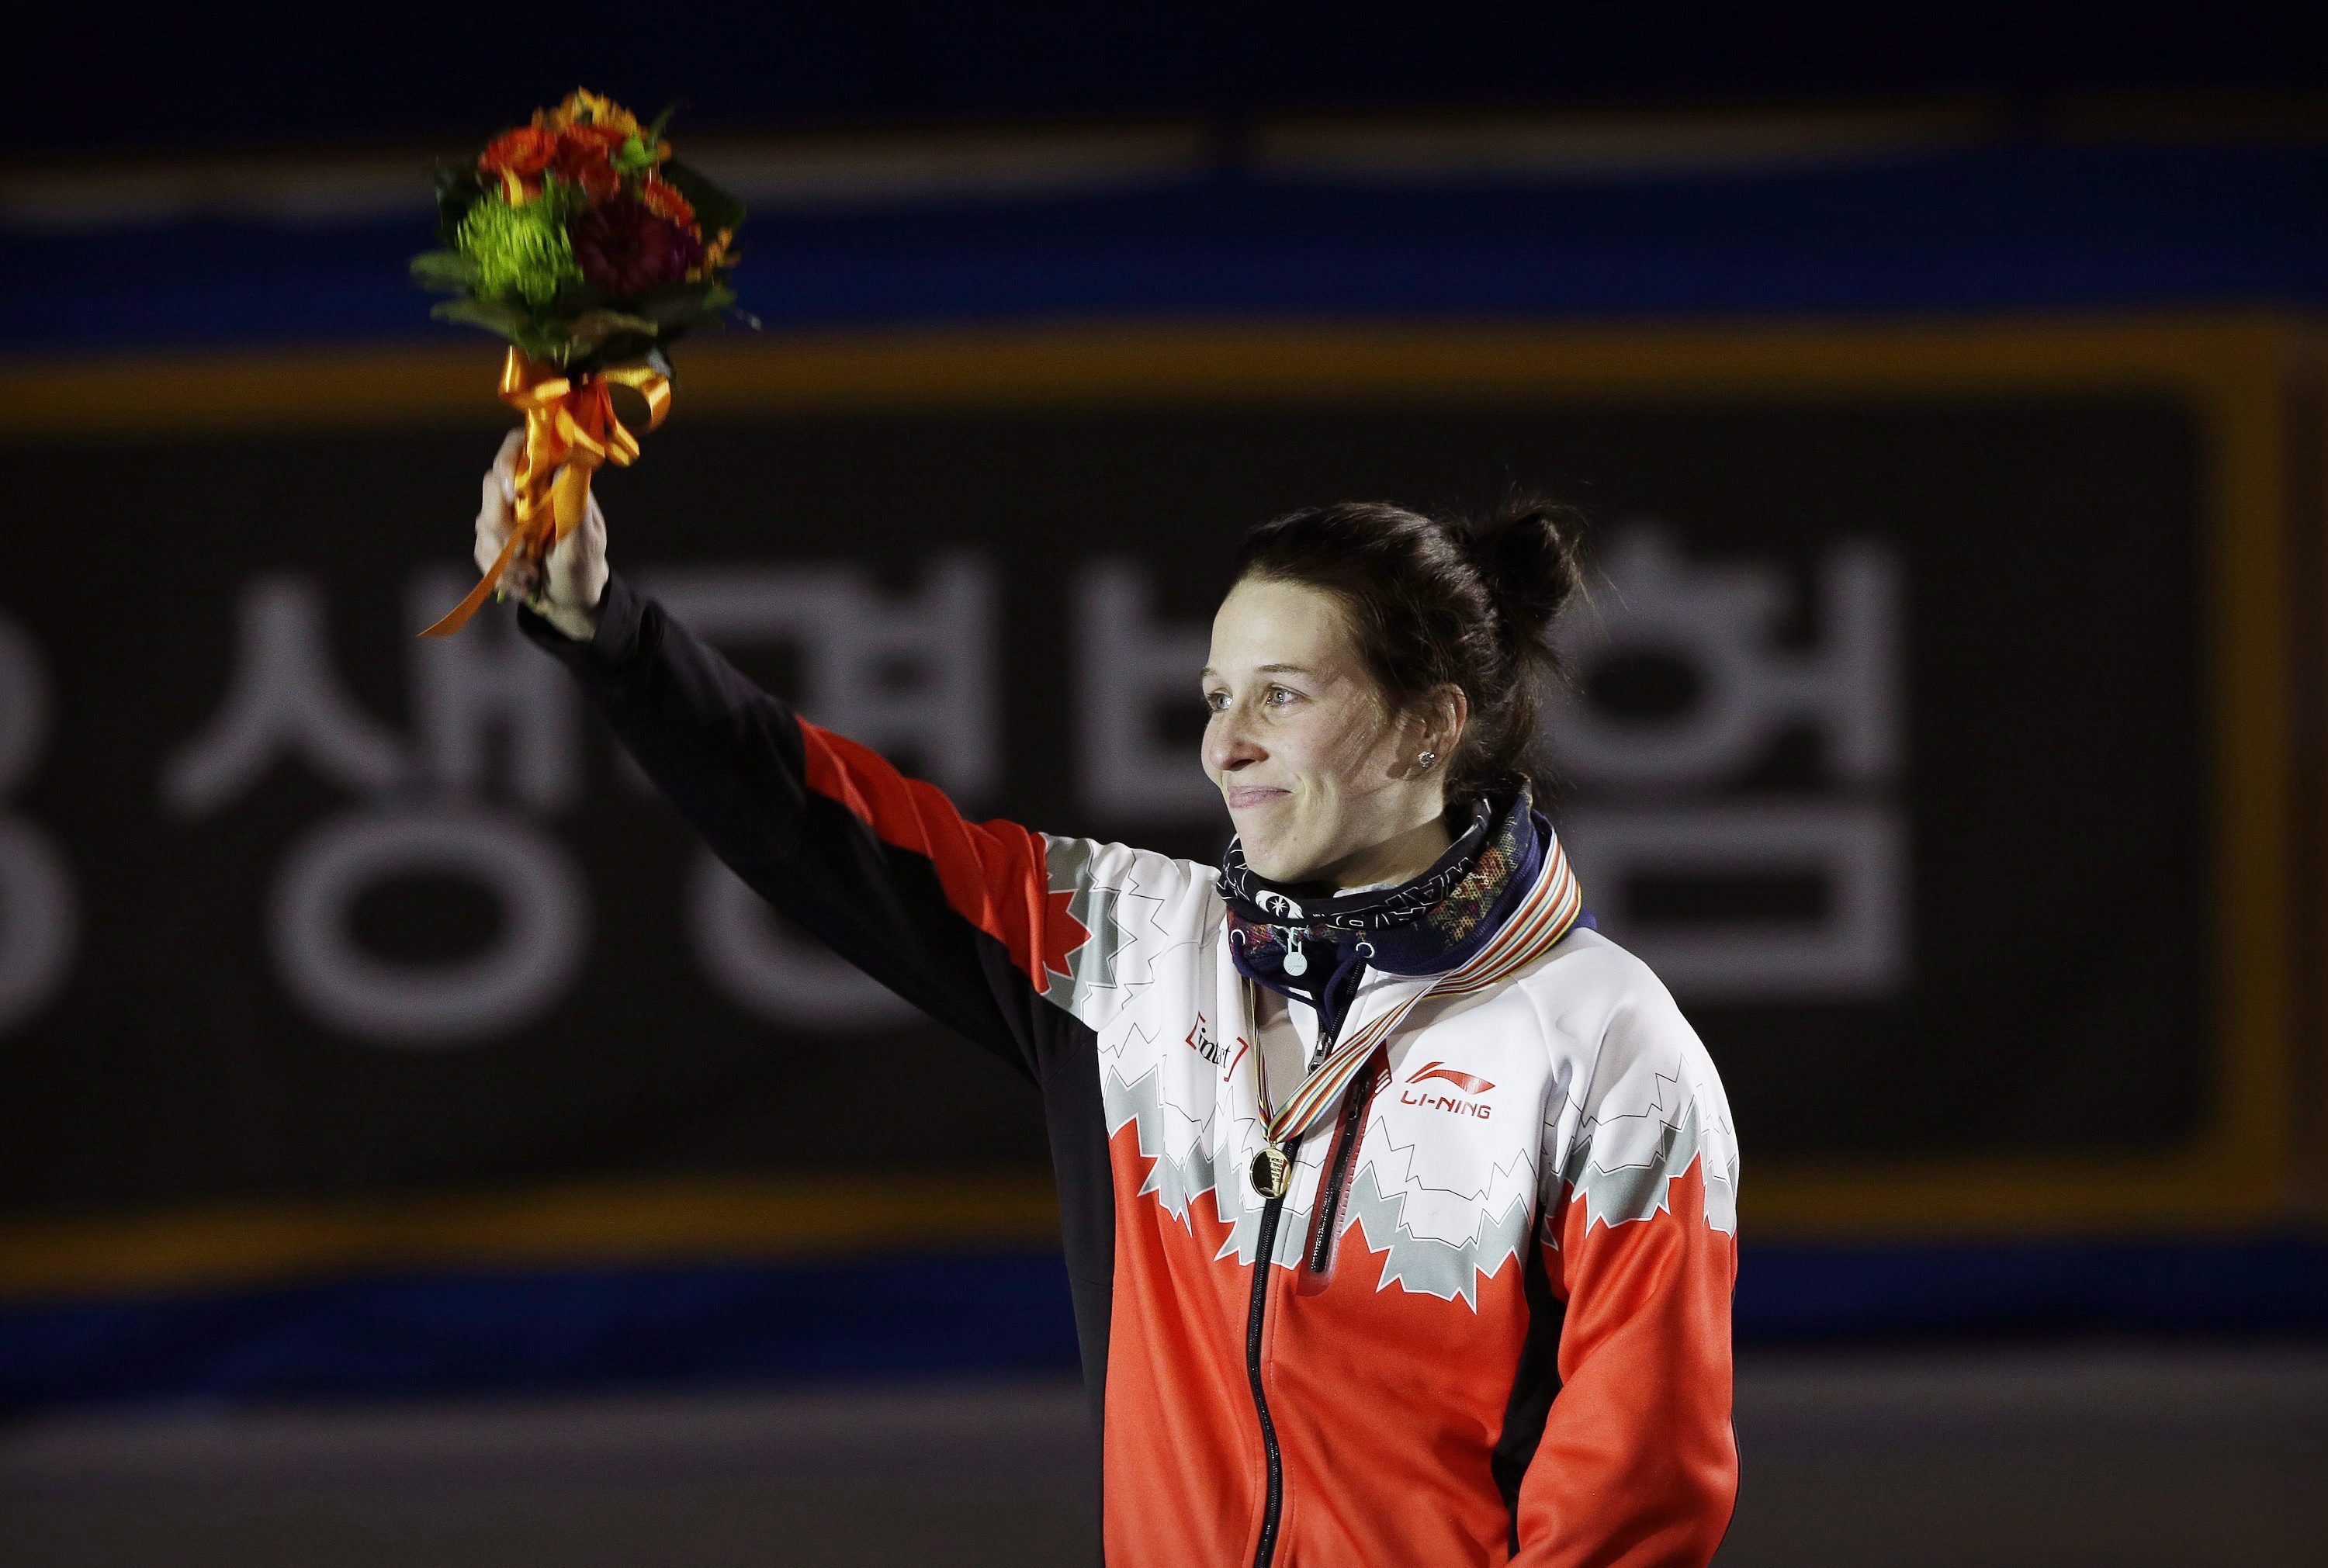 Gold medalist Marianne St-Gelais of Canada celebrates during the awards ceremony of the women's 1500 meter final at the ISU World Cup Short Track Speed Skating in Seoul, South Korea, Saturday, March 12, 2016. (AP Photo/Ahn Young-joon)